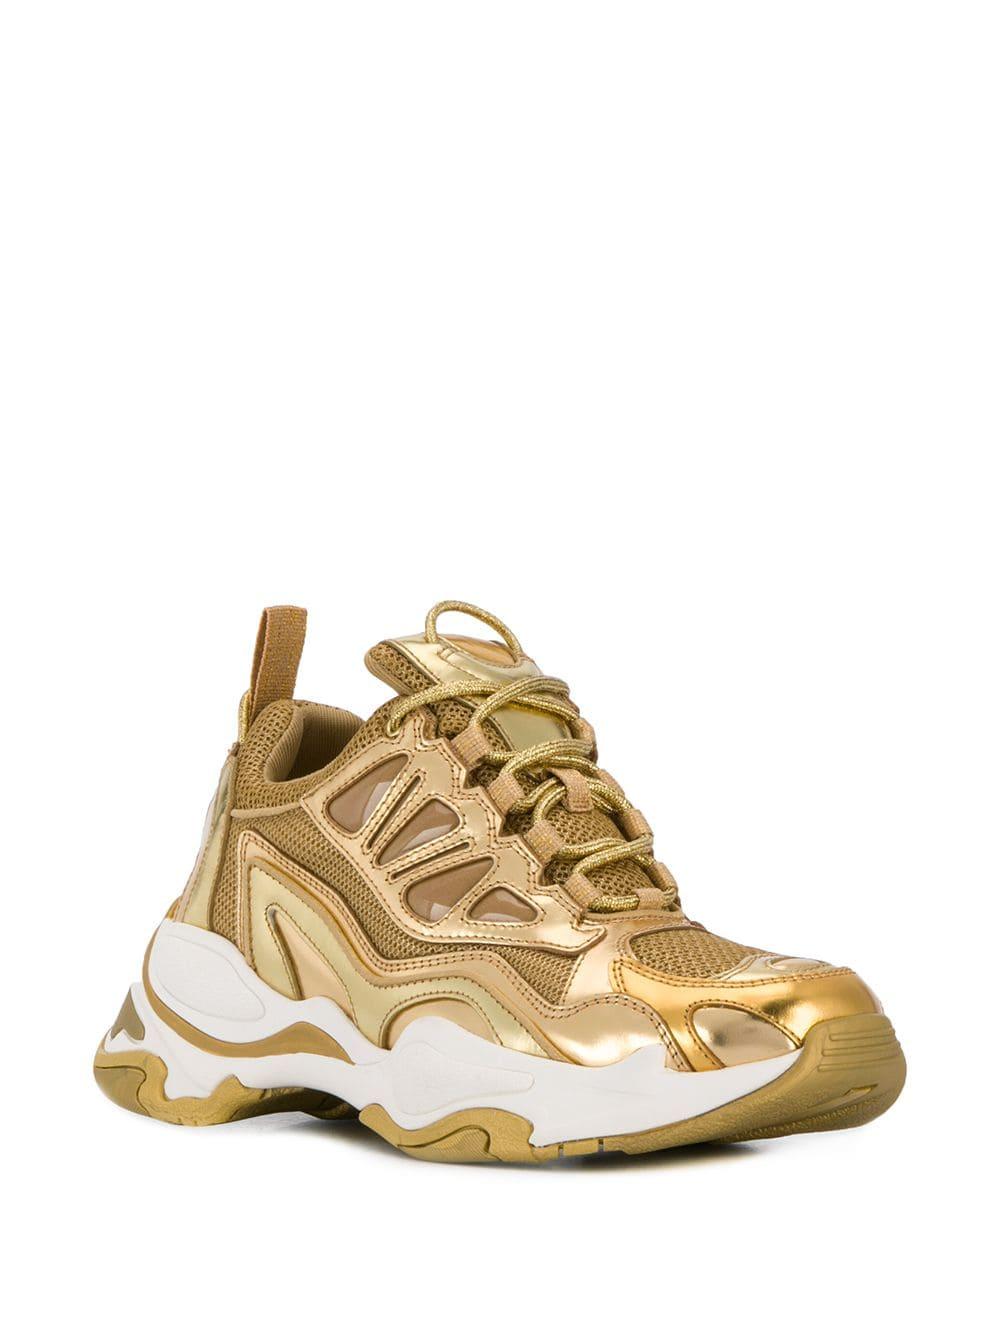 Sandro Rubber Astro Trainers in Gold (Metallic) - Lyst